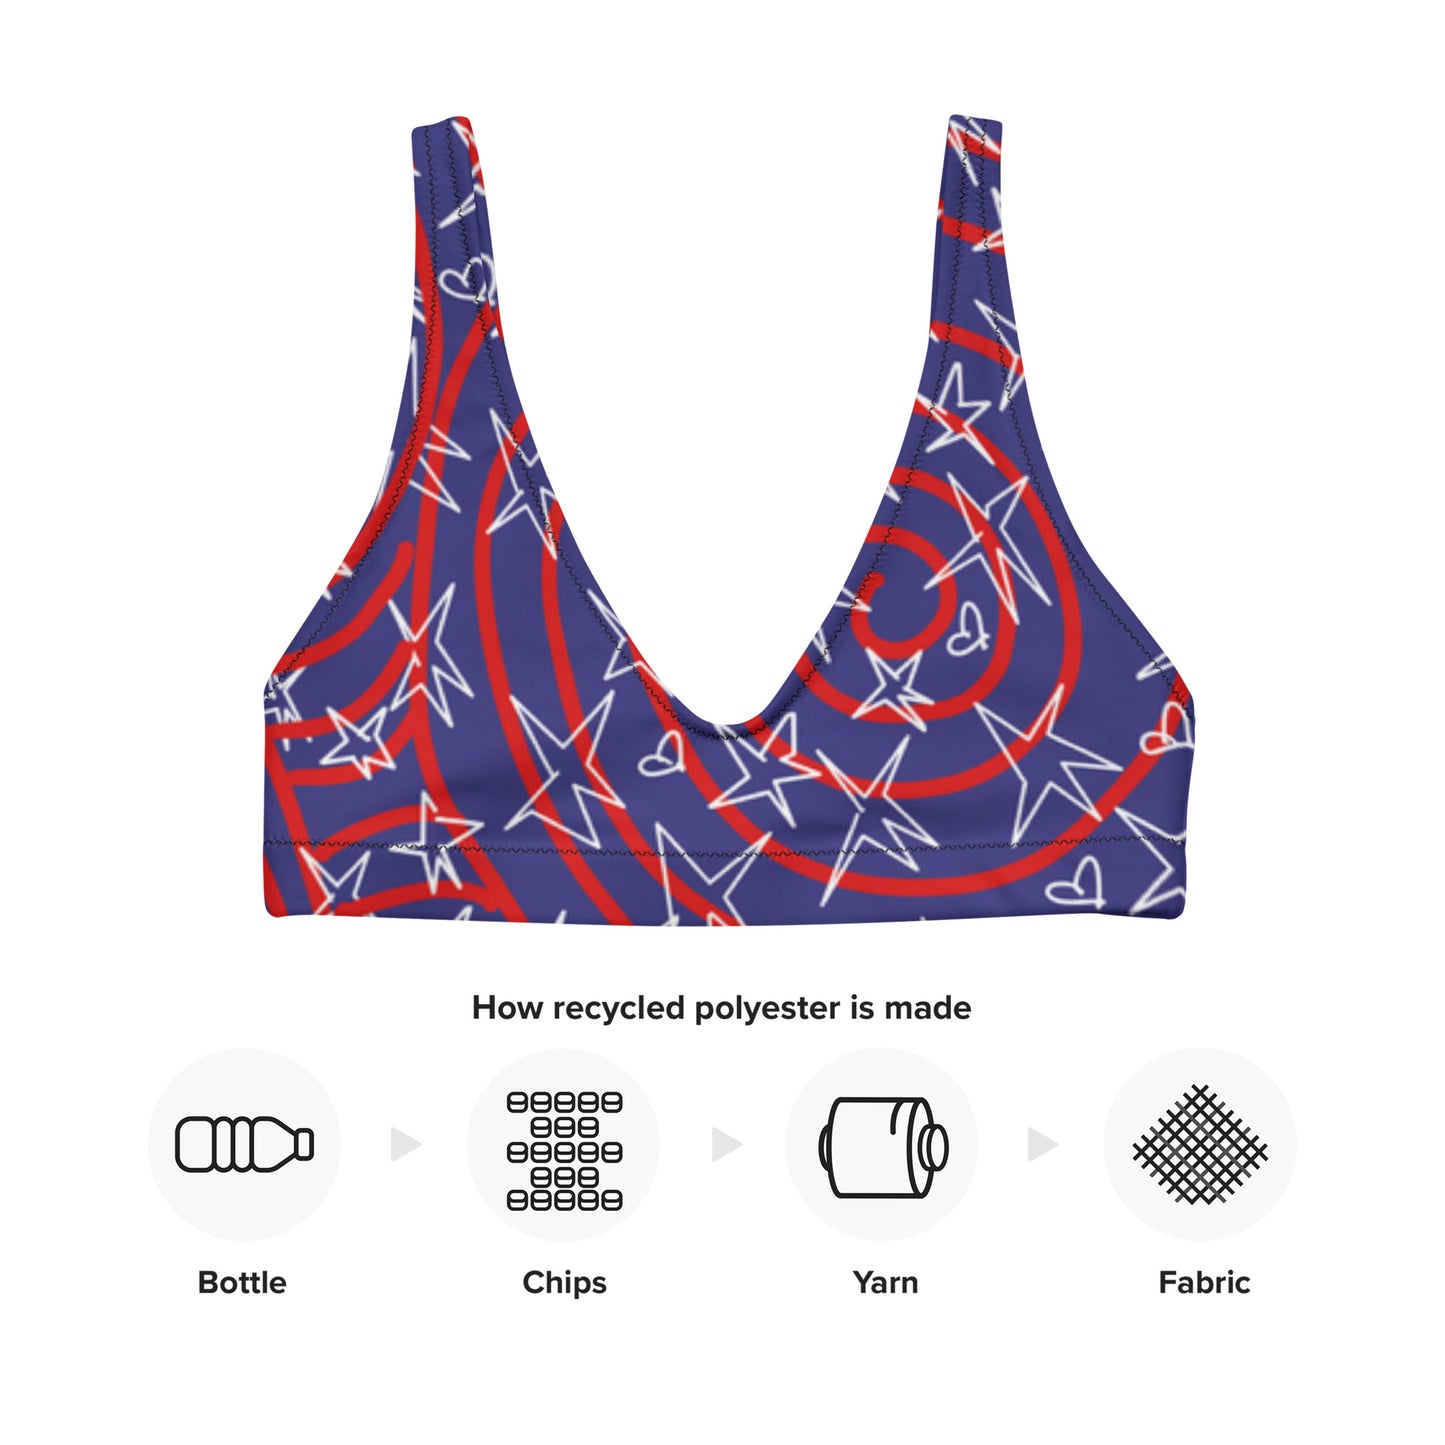 America inspired Recycled padded bikini top. Design hand-painted by the Designer Maria Alejandra Echenique